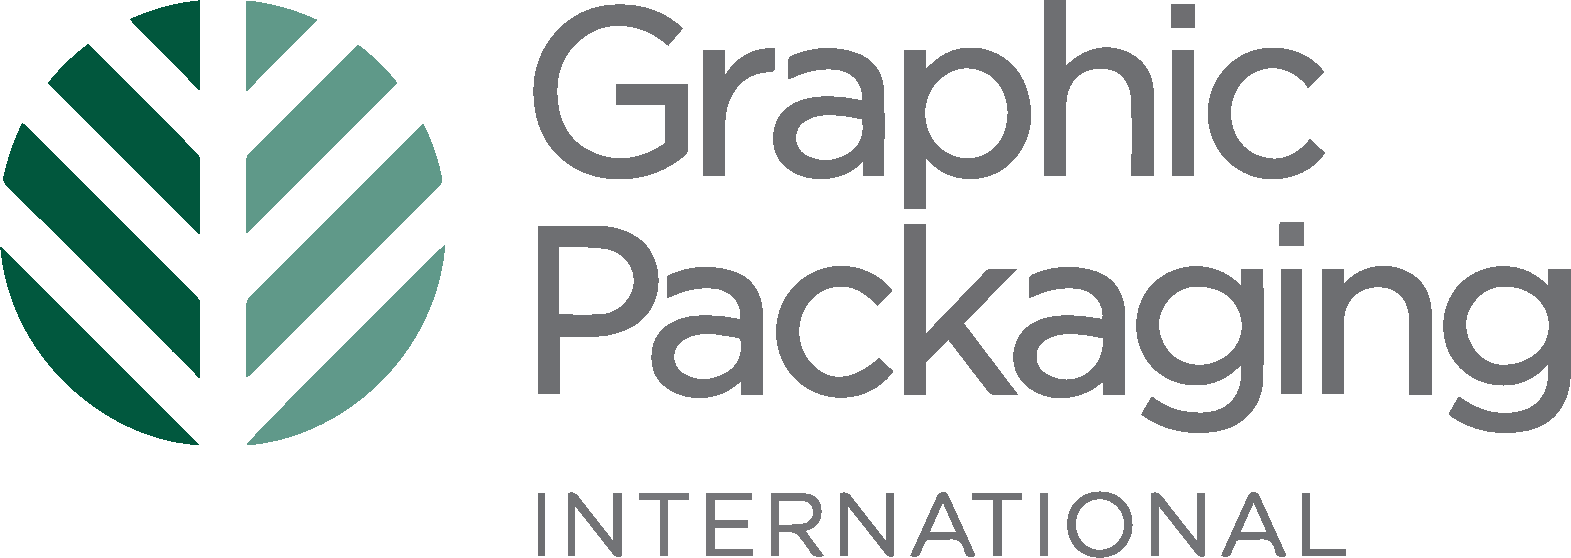 Graphic Packaging International.png